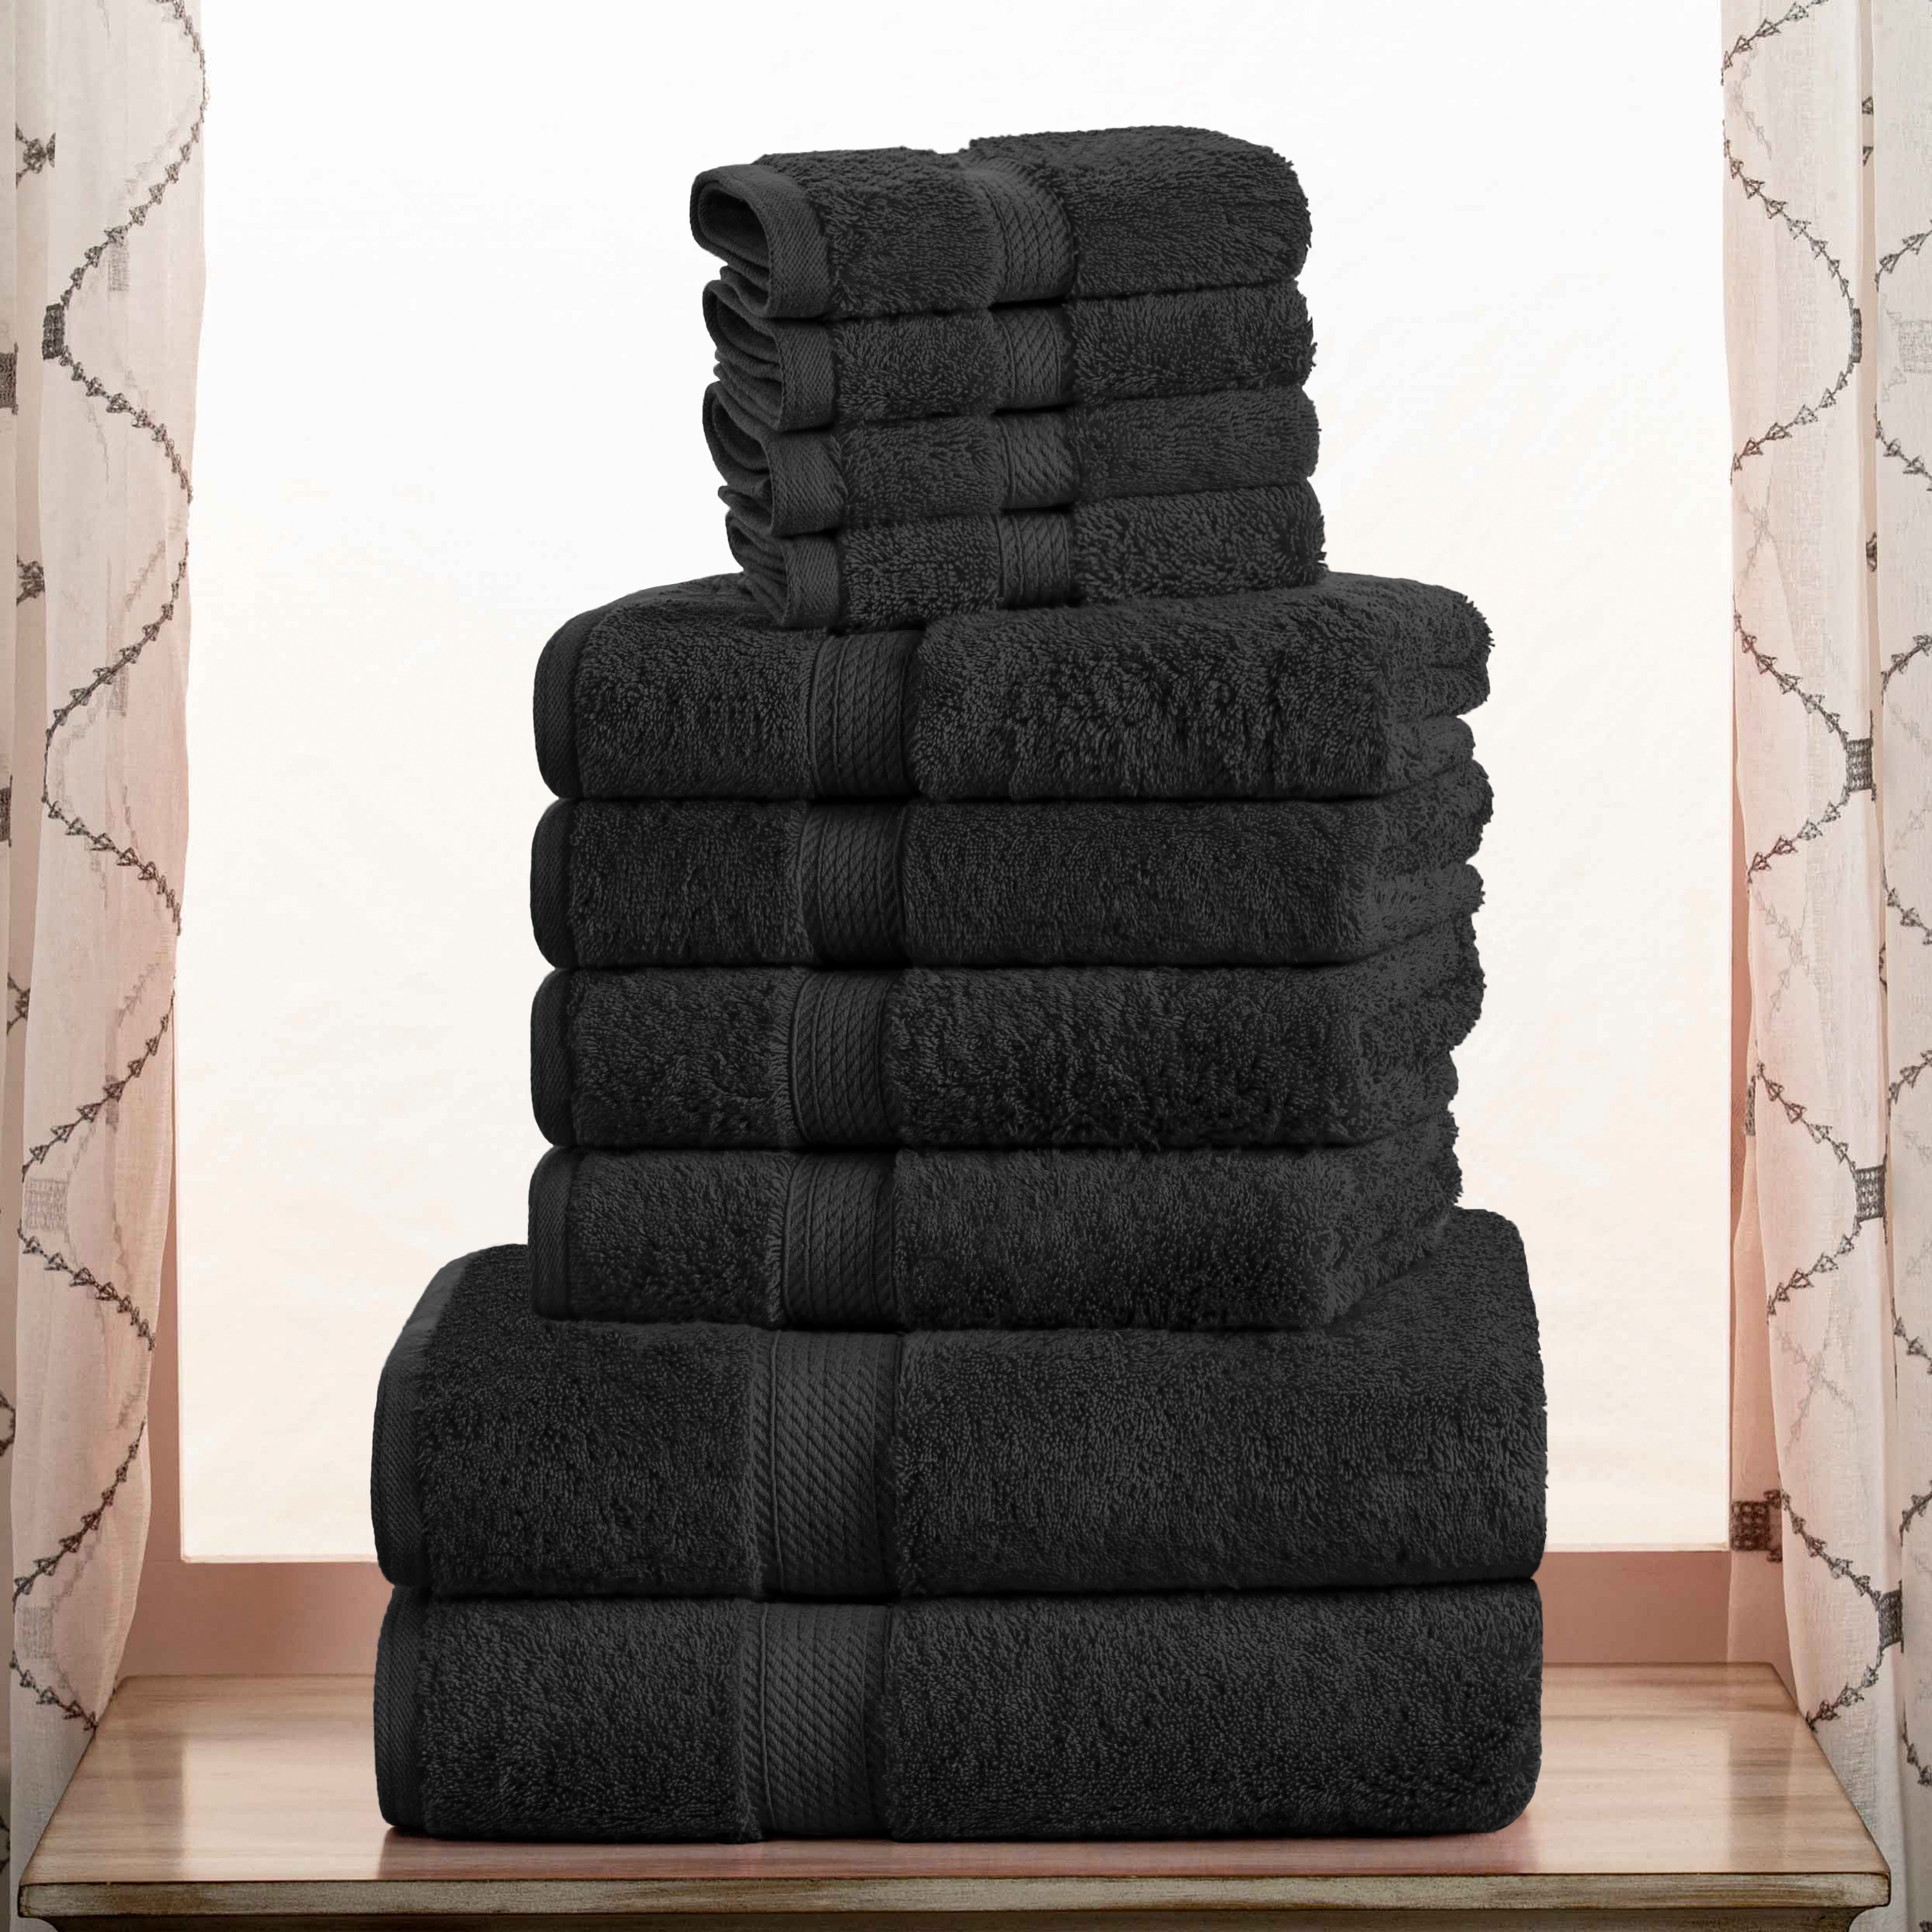 https://ak1.ostkcdn.com/images/products/is/images/direct/52bbea18ace62e8bf268512d5281c36a32cc940f/Egyptian-Cotton-Heavyweight-Solid-Plush-Towel-Set-by-Superior.jpg